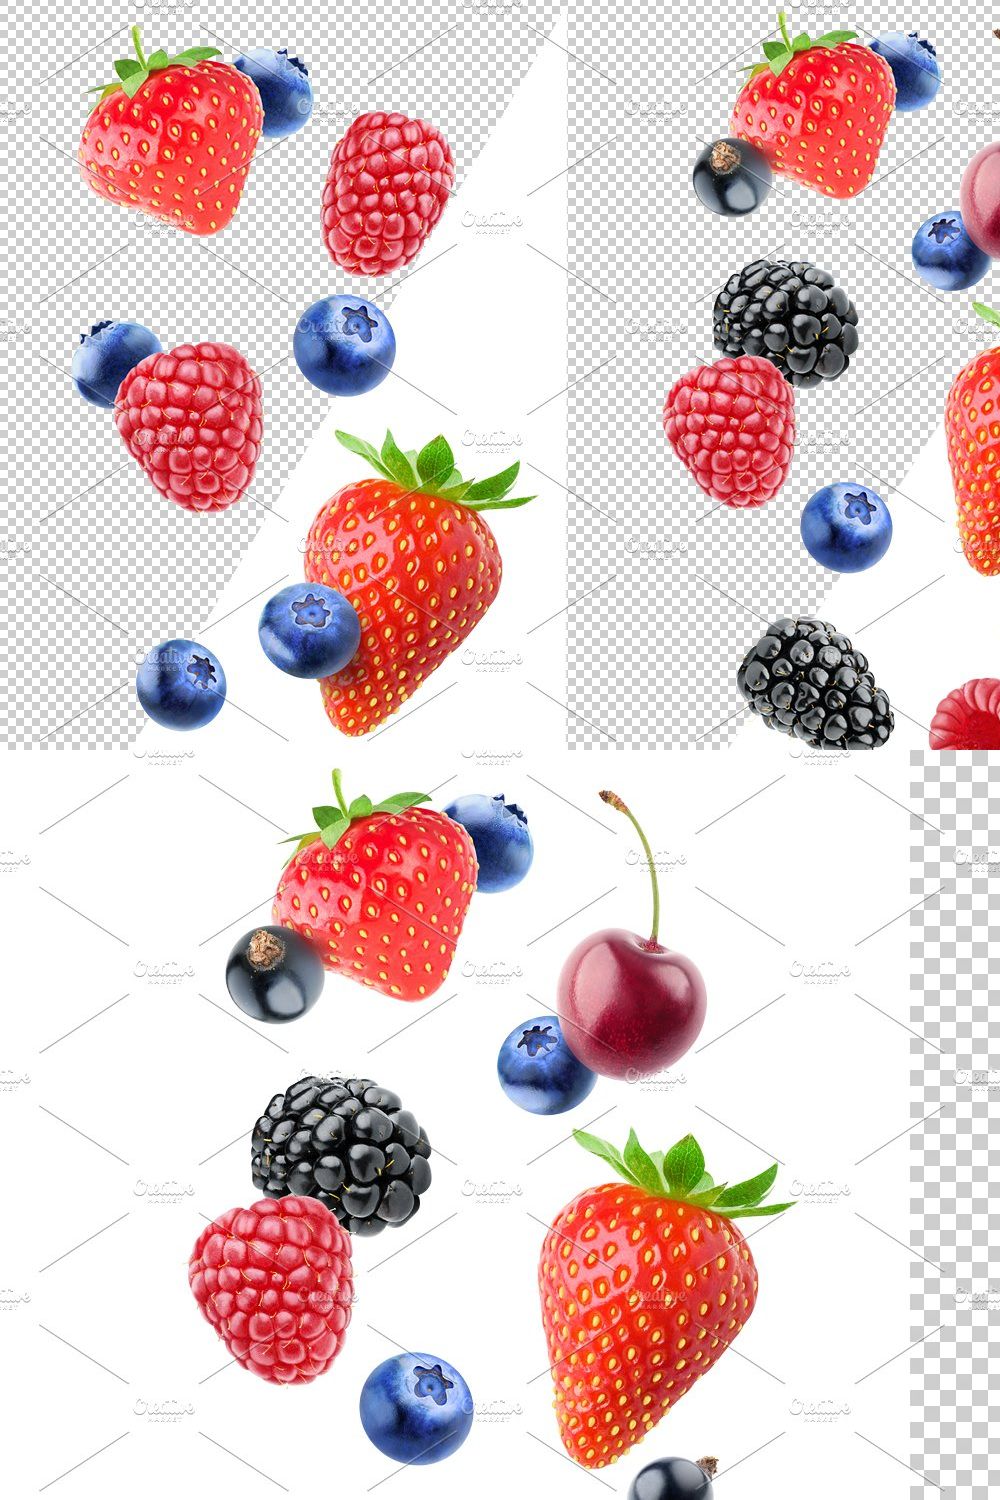 Flying berries pinterest preview image.